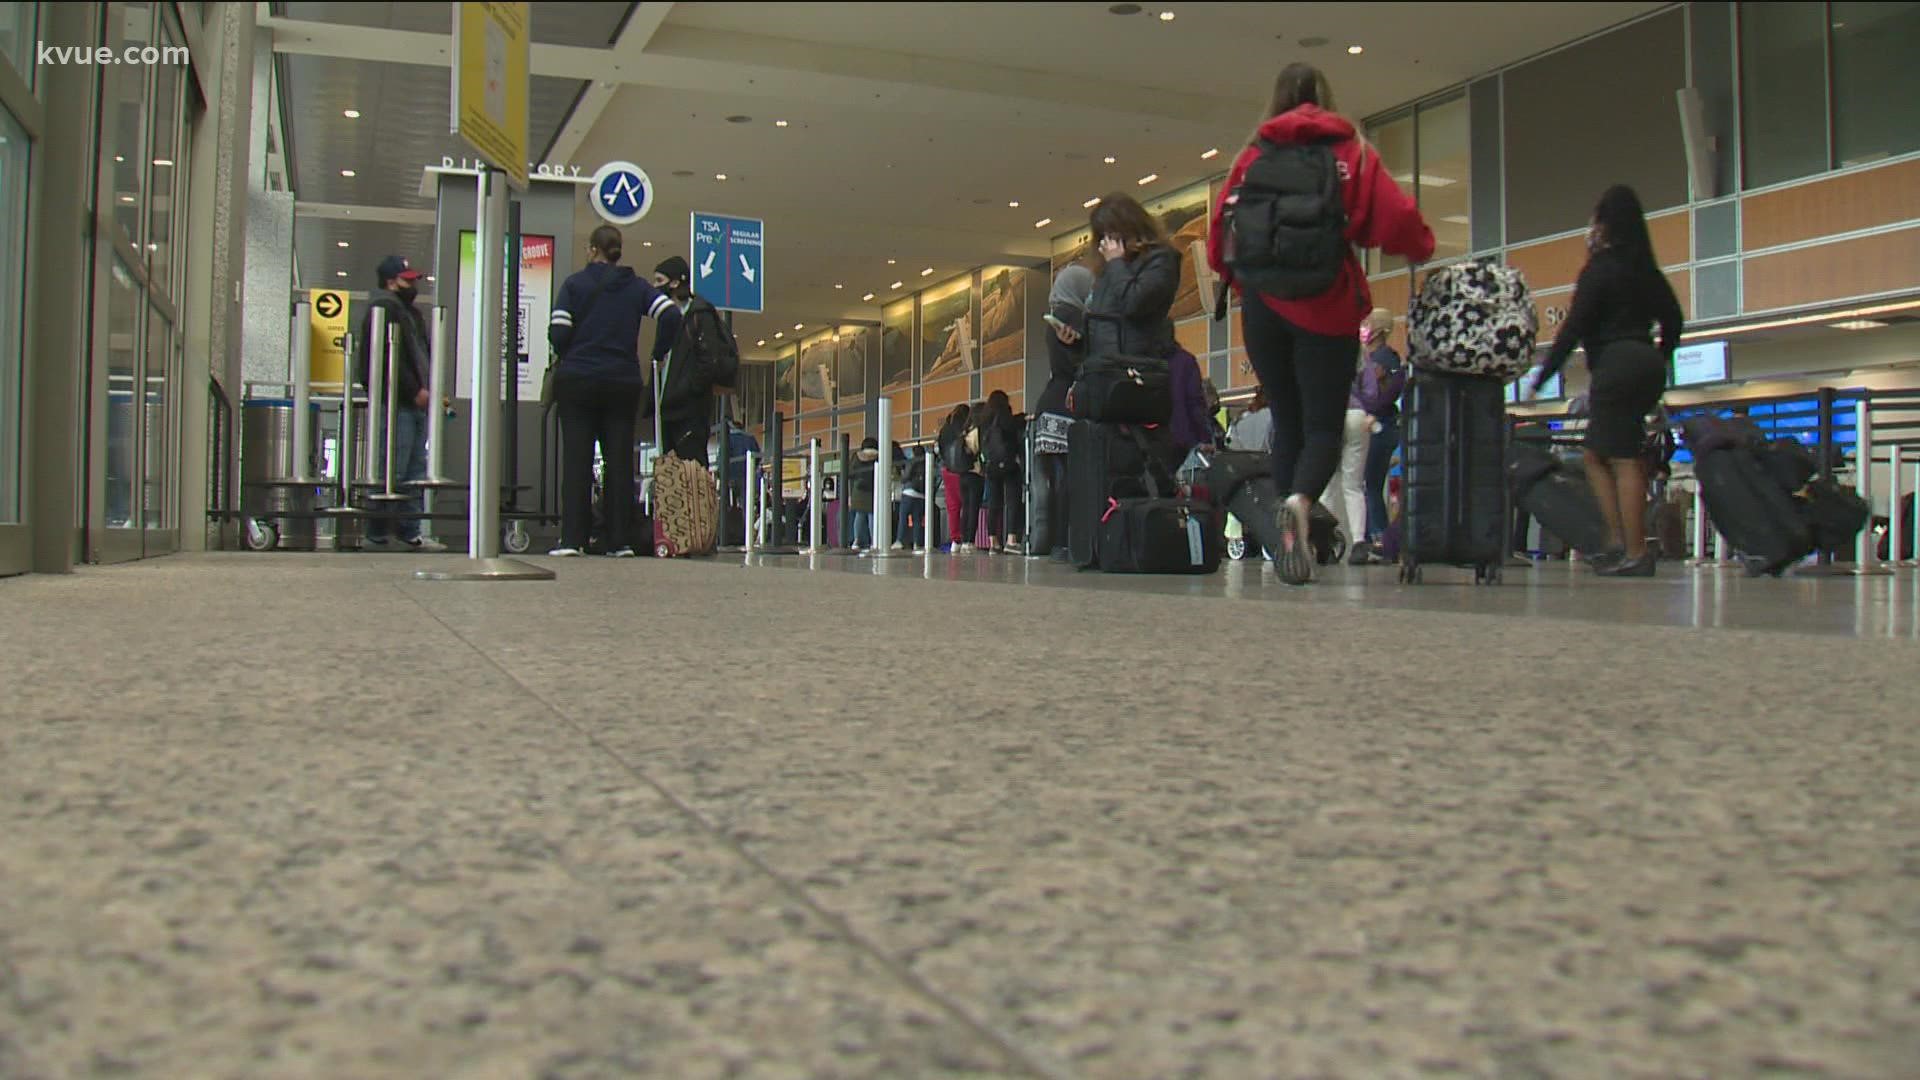 Austin's airport is prepared for a surge in holiday travelers as COVID-19 cases surge as well. KVUE's Bryce Newberry has the latest.